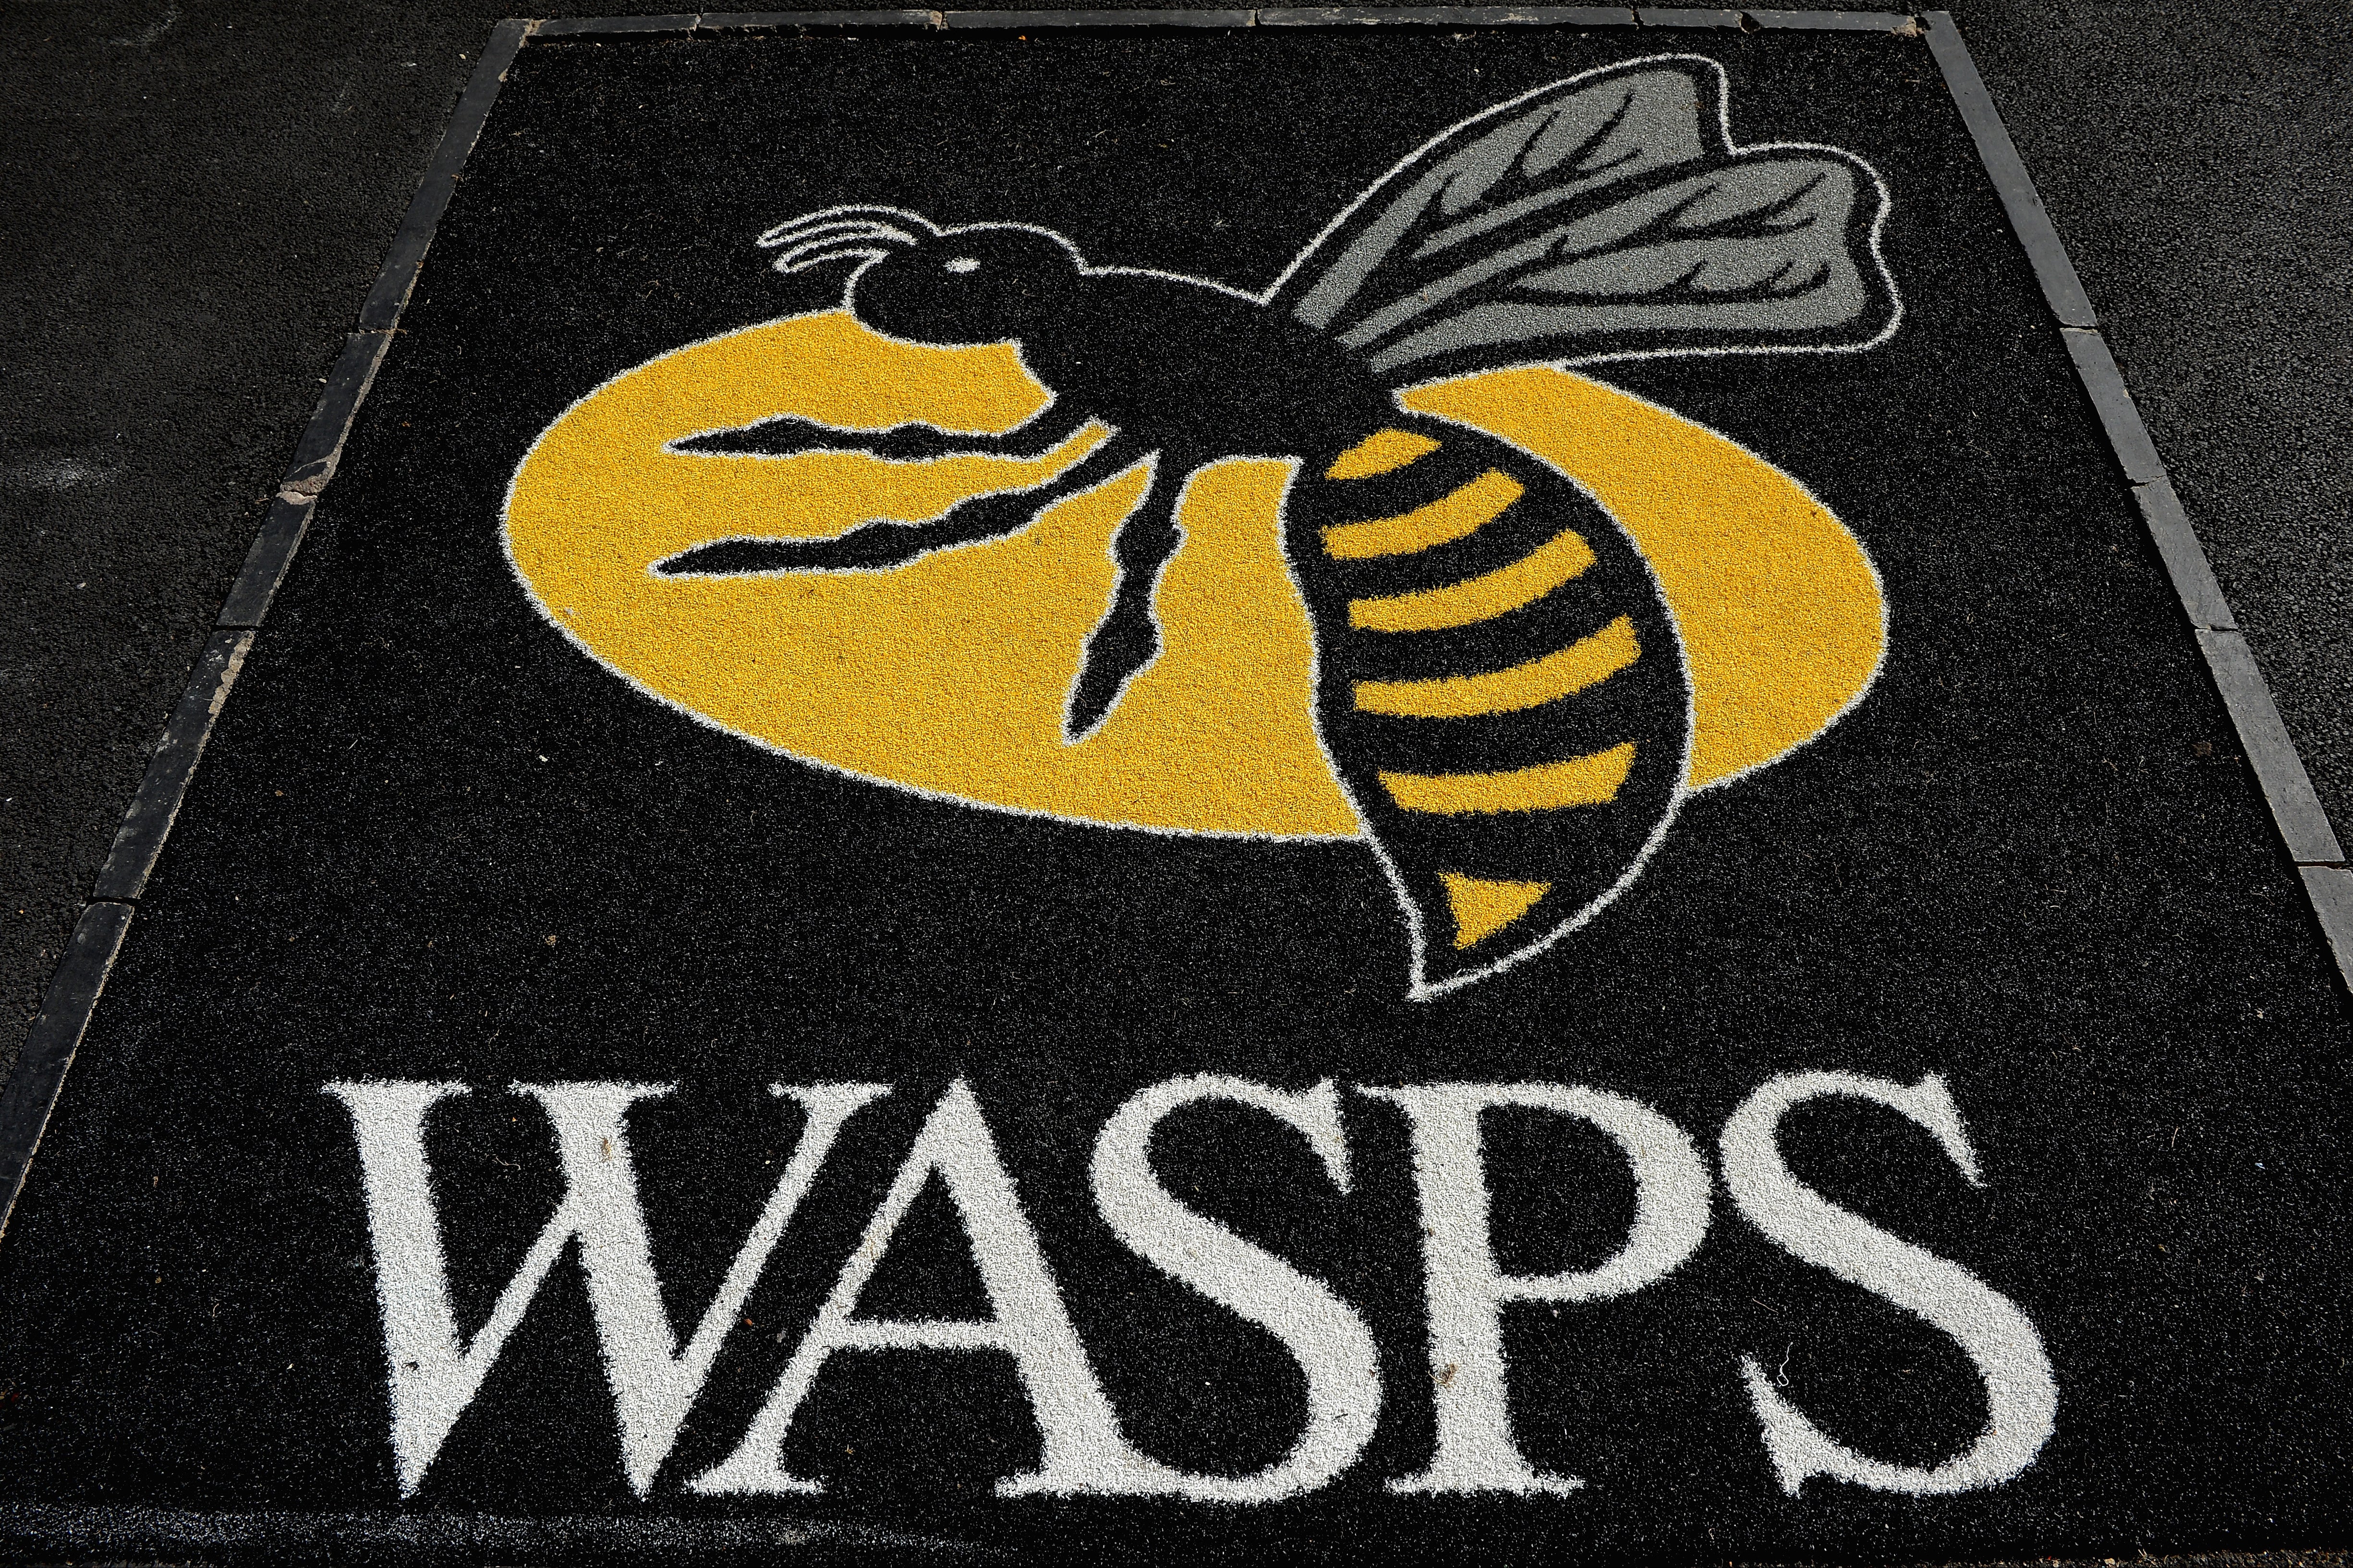 Wasps have announced plans to explore the possible building of a stadium in Kent